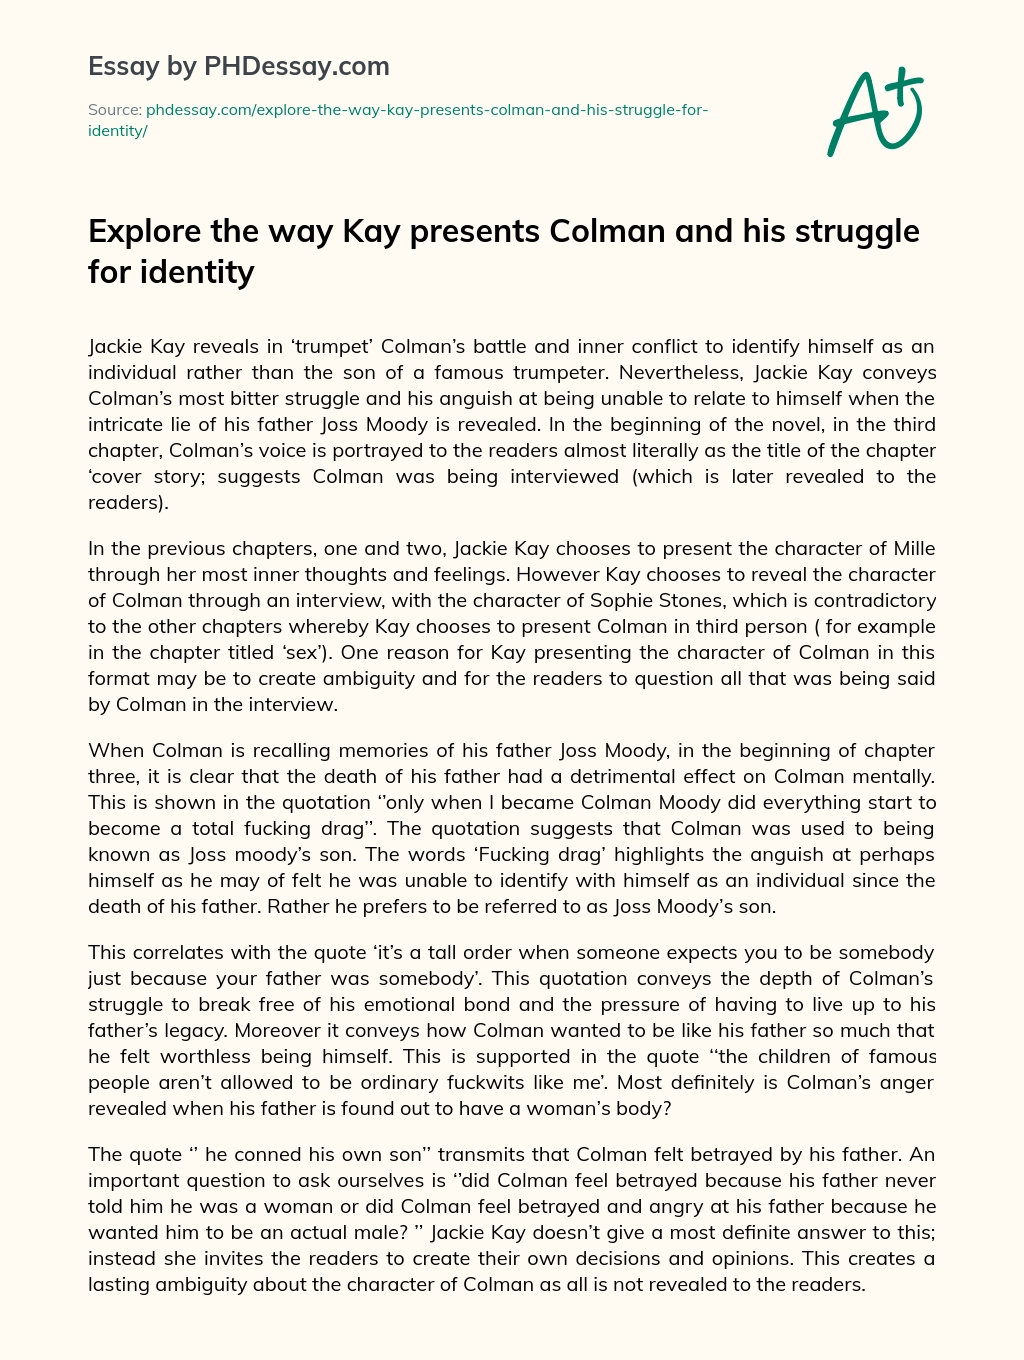 Explore the way Kay presents Colman and his struggle for identity essay